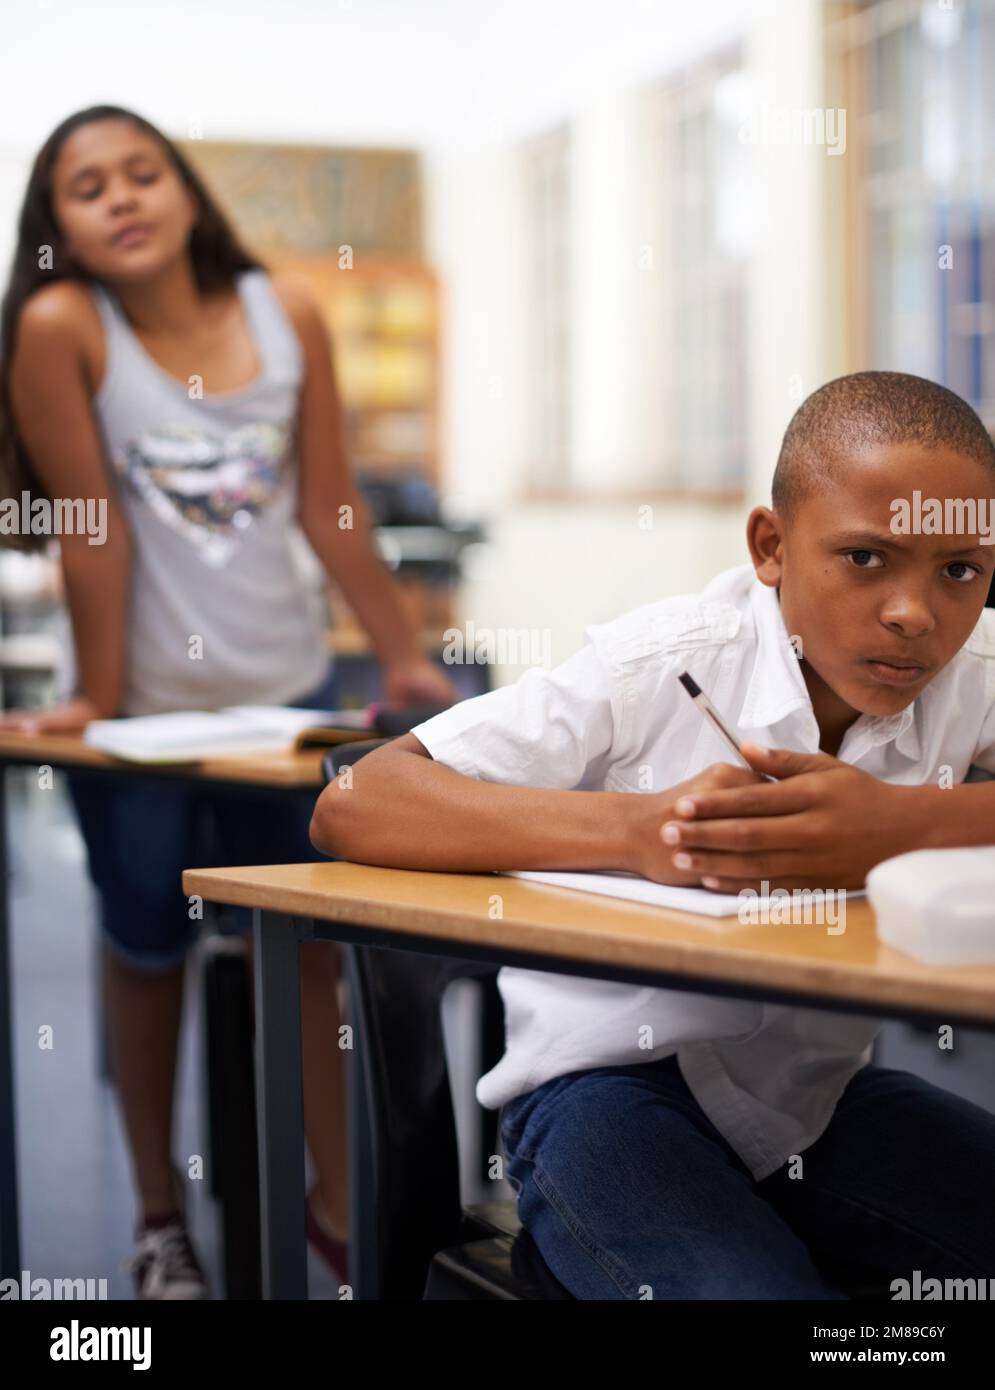 She always copies my work. Portrait of a young boy writing a test while a classmate tries to copy. Stock Photo